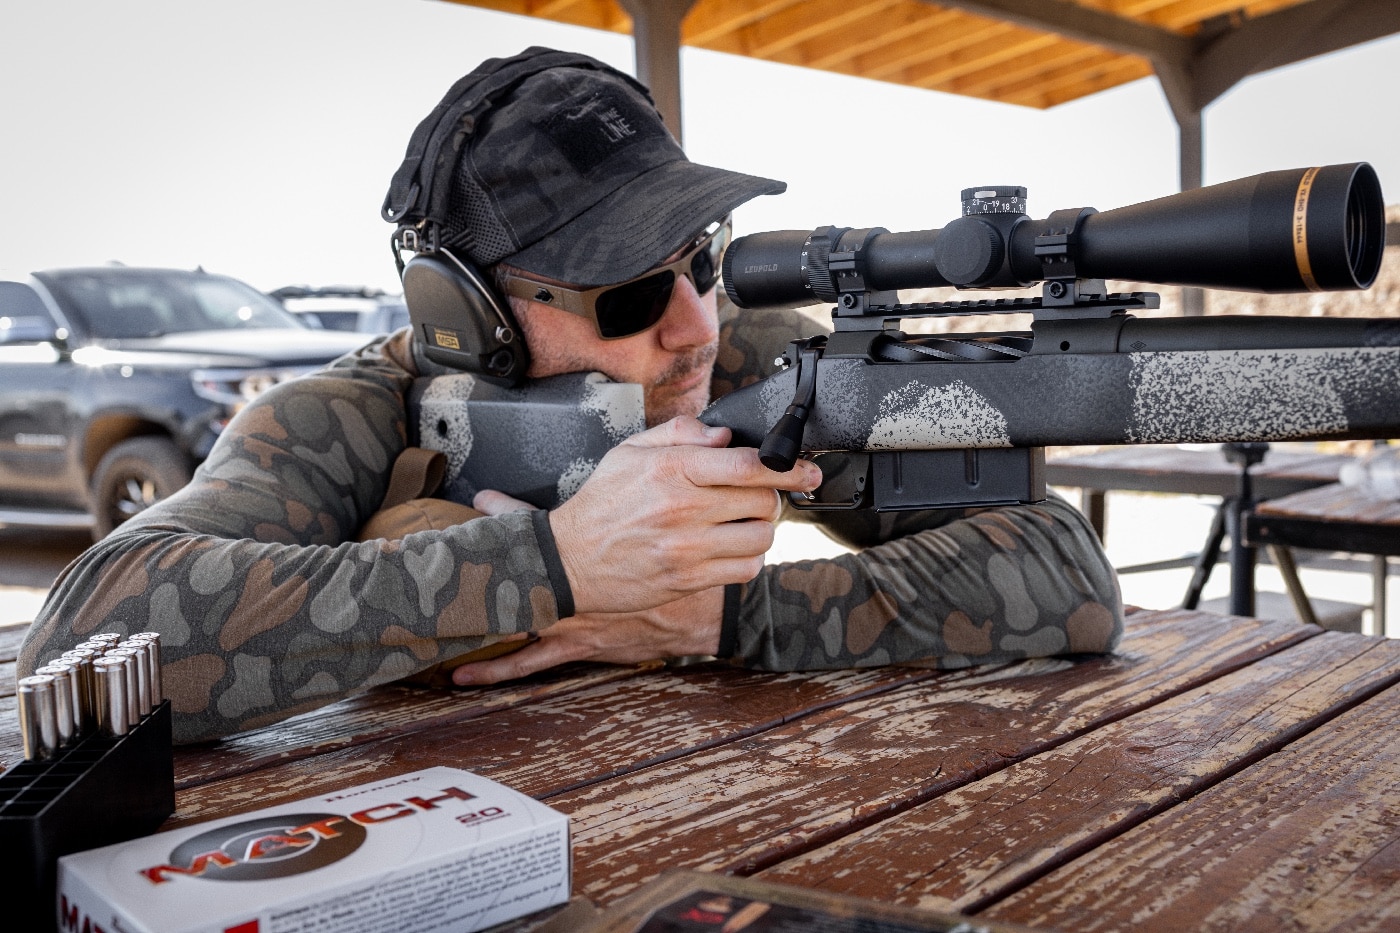 We see Jeremy Tremp testing the accuracy and precision of the 7mm PRC chambered Springfield Model 2020 Waypoint hunting rifle. The rifle stock has a camo pattern perfect for big game hunting in North America.